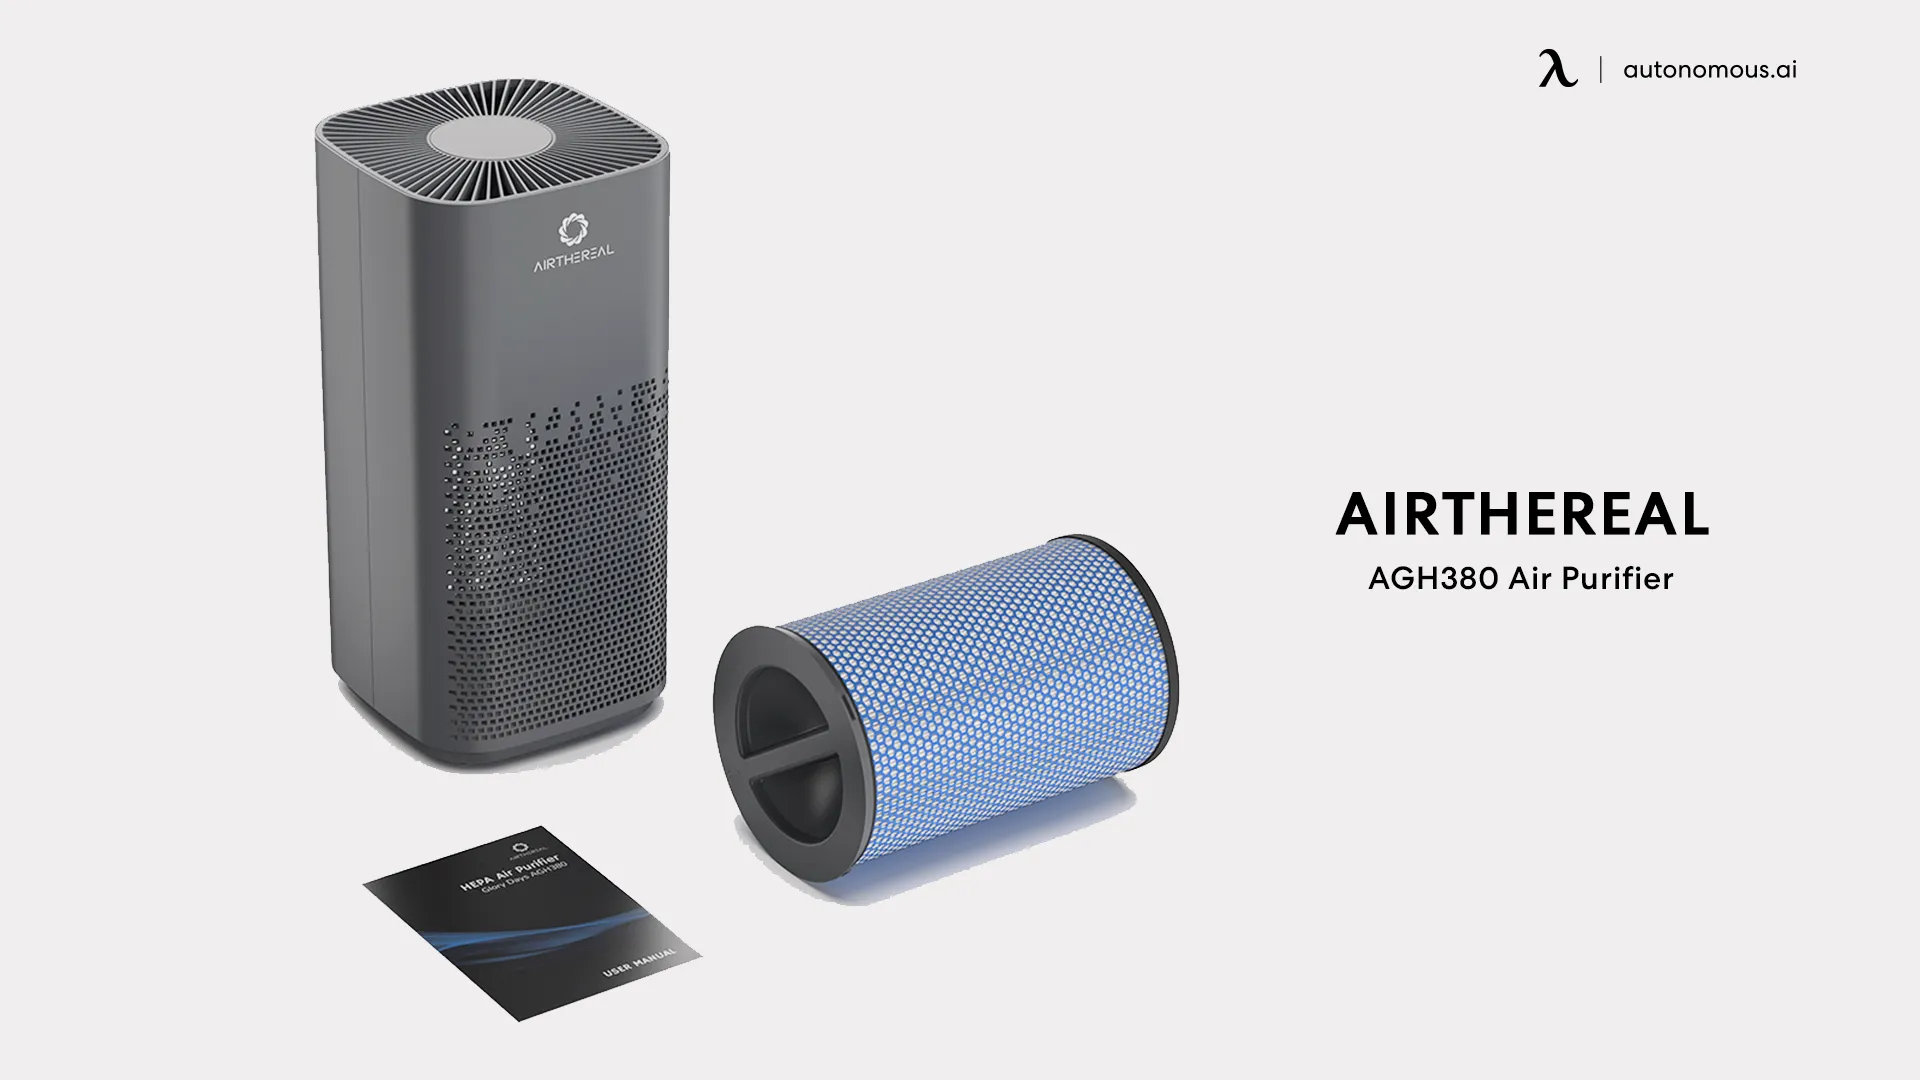 Airthereal AGH380 Air Purifier (510 sq. ft model)